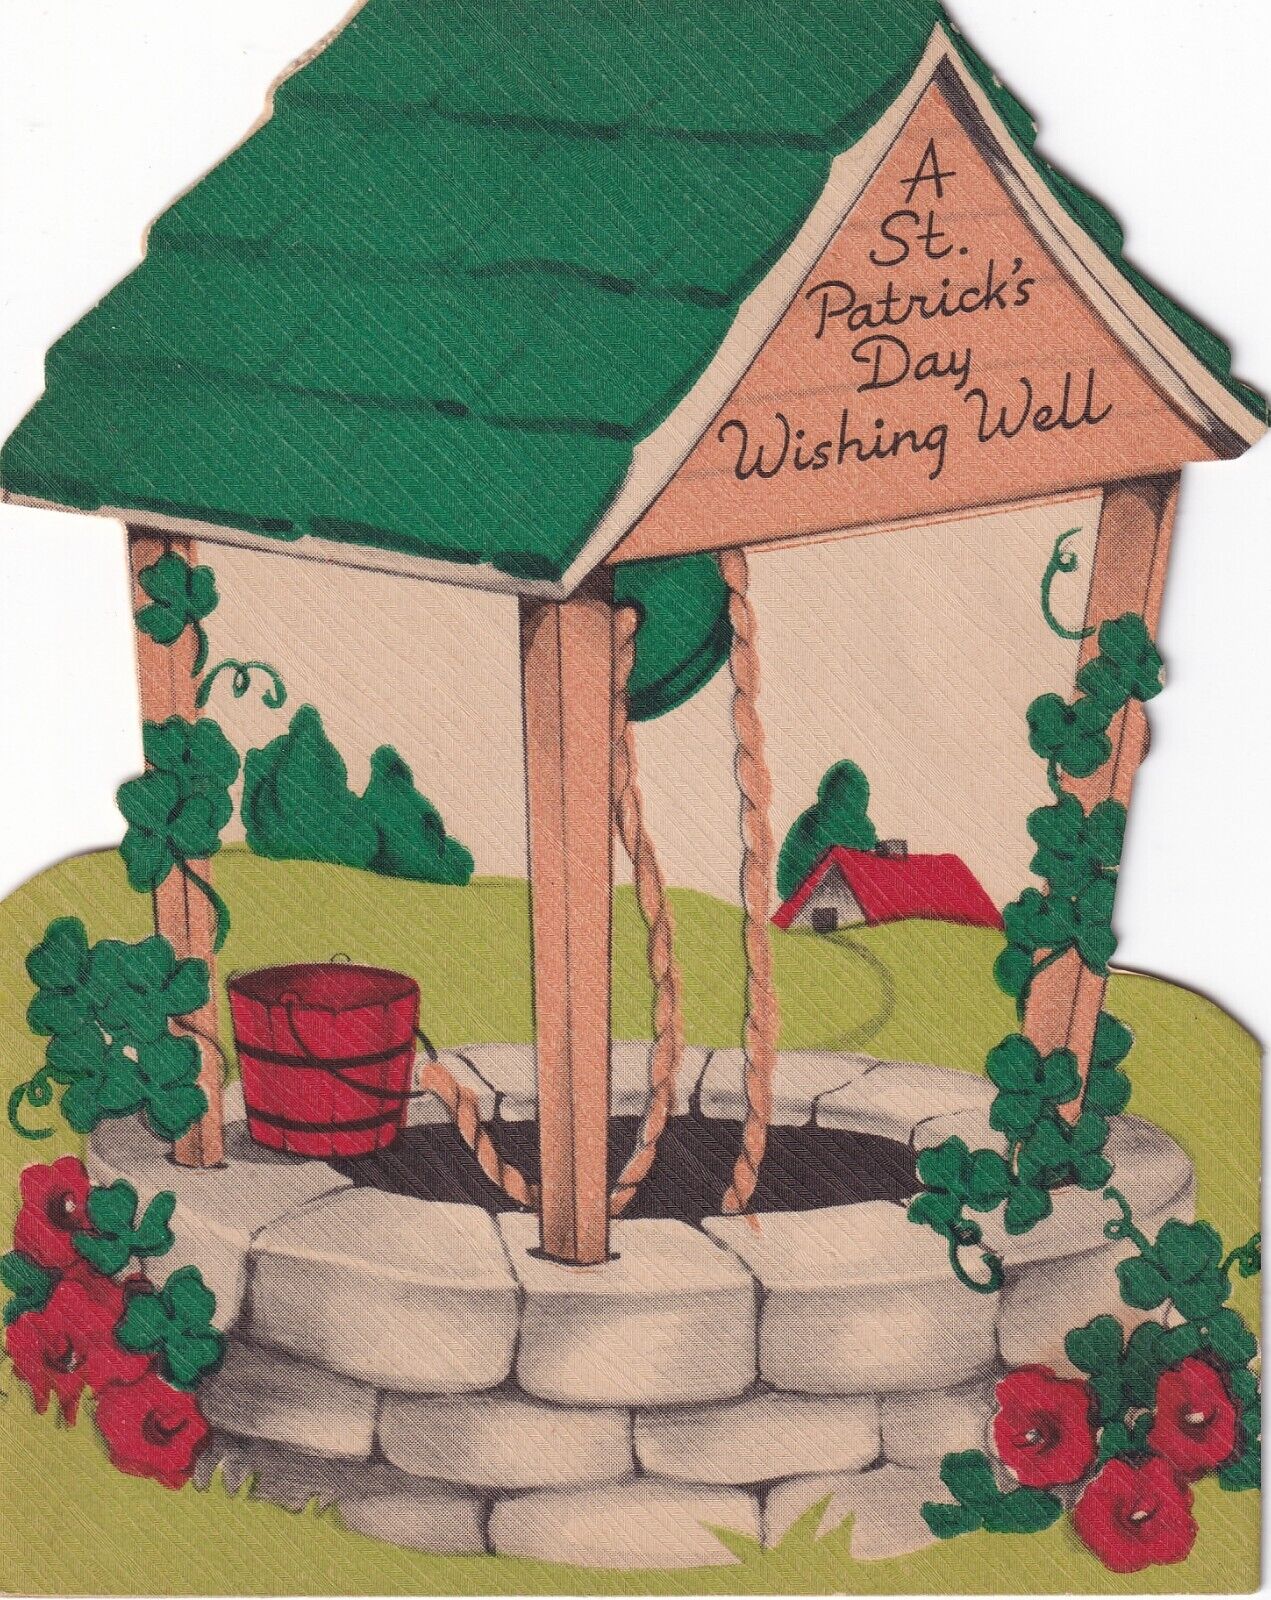 Vintage Die Cut St. Patrick\'s Day Wishing Well  Fold Out Card